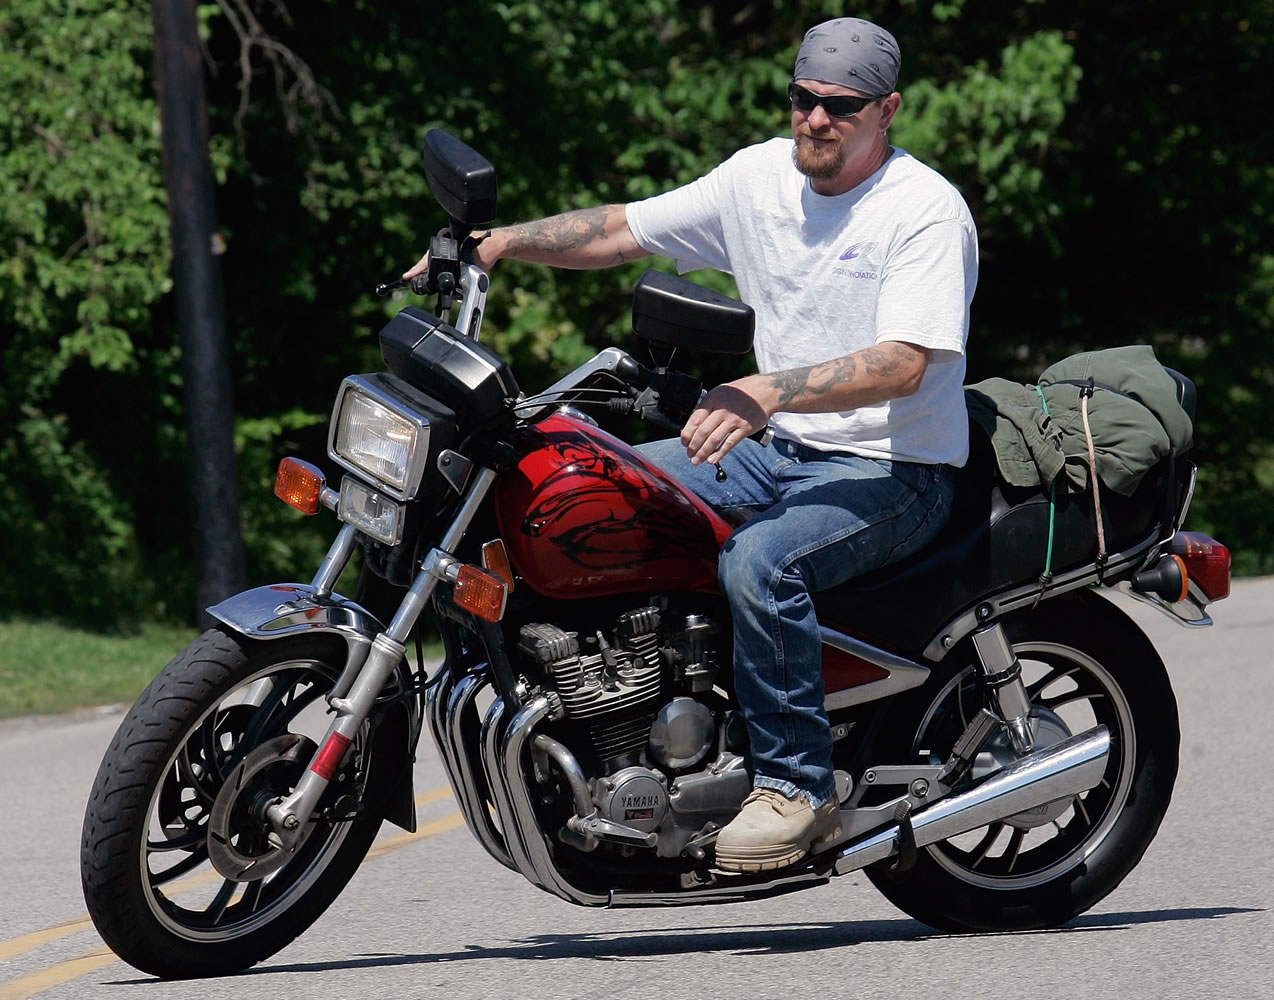 Randy Knauff takes off from work without a helmet on his motorcycle in Harmony, Pa., in 2008.